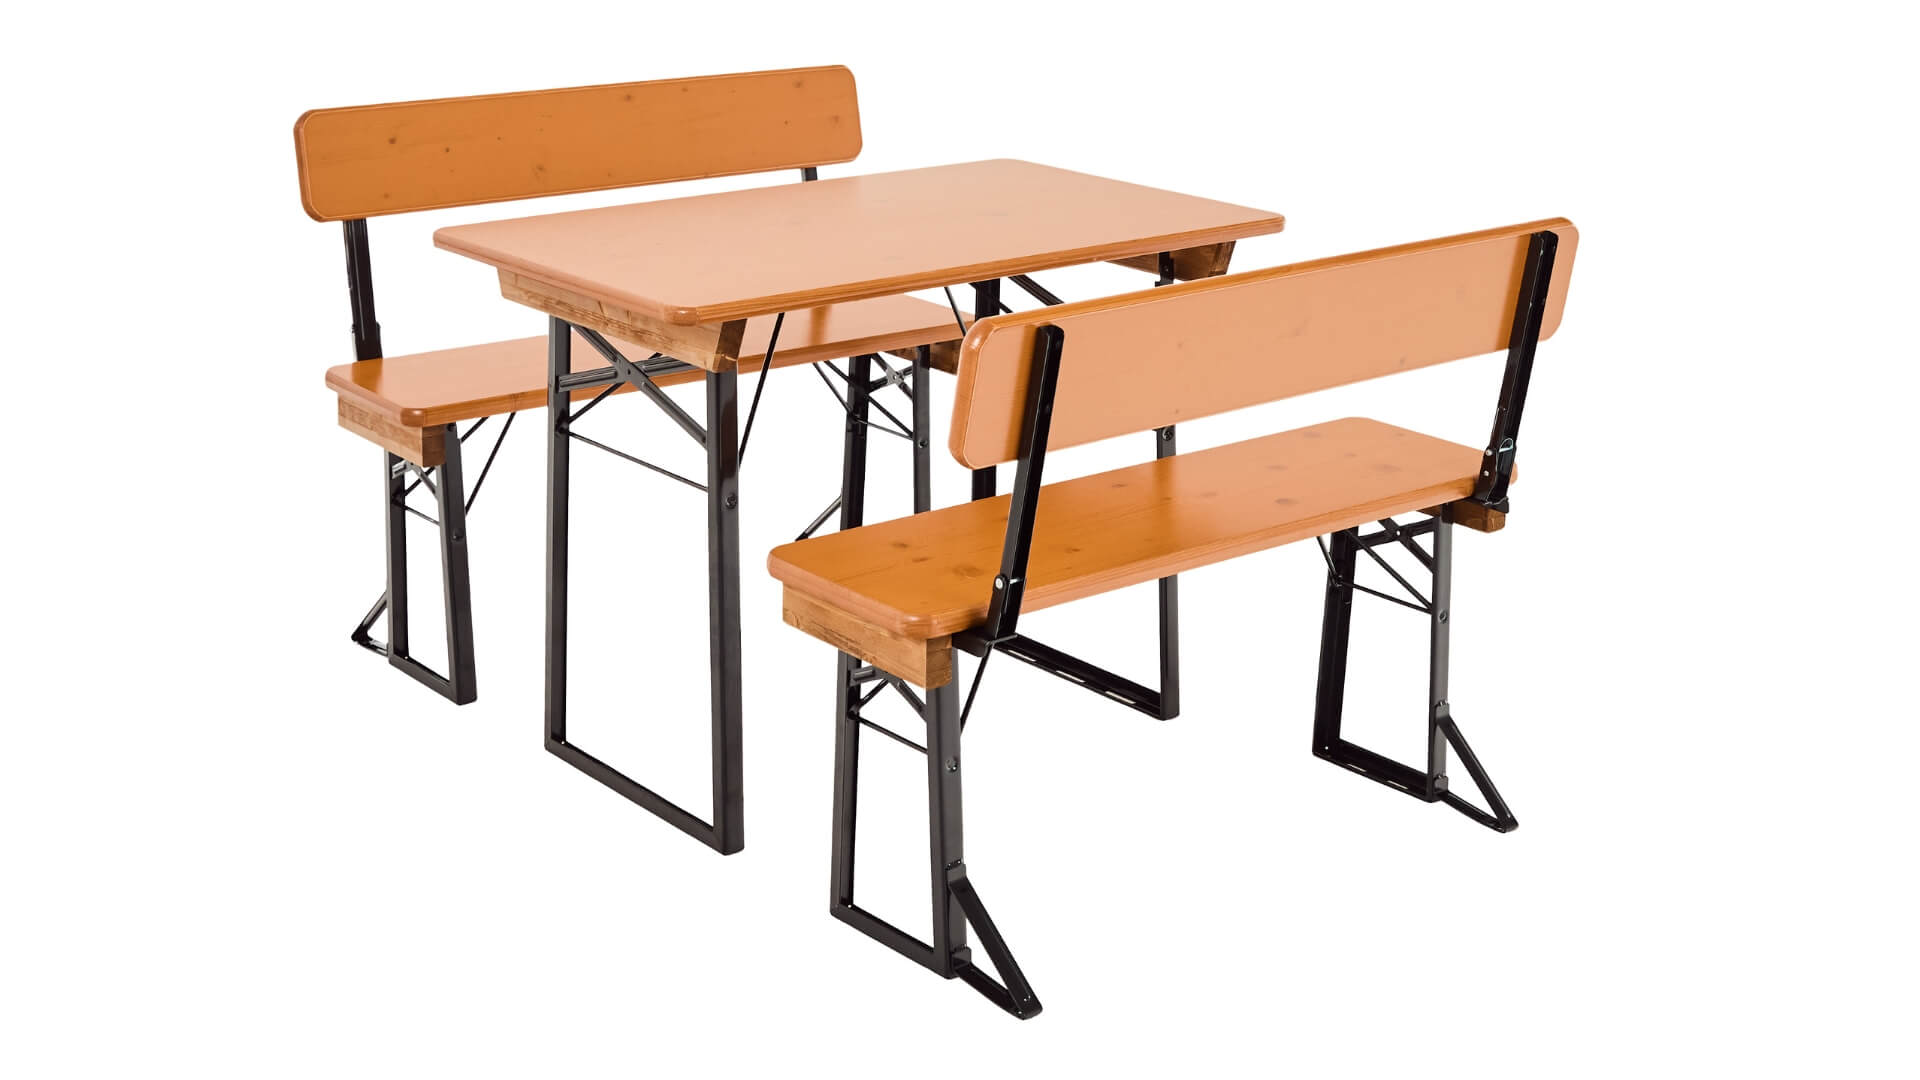 The small beer garden table sets with backrest in the color pine.